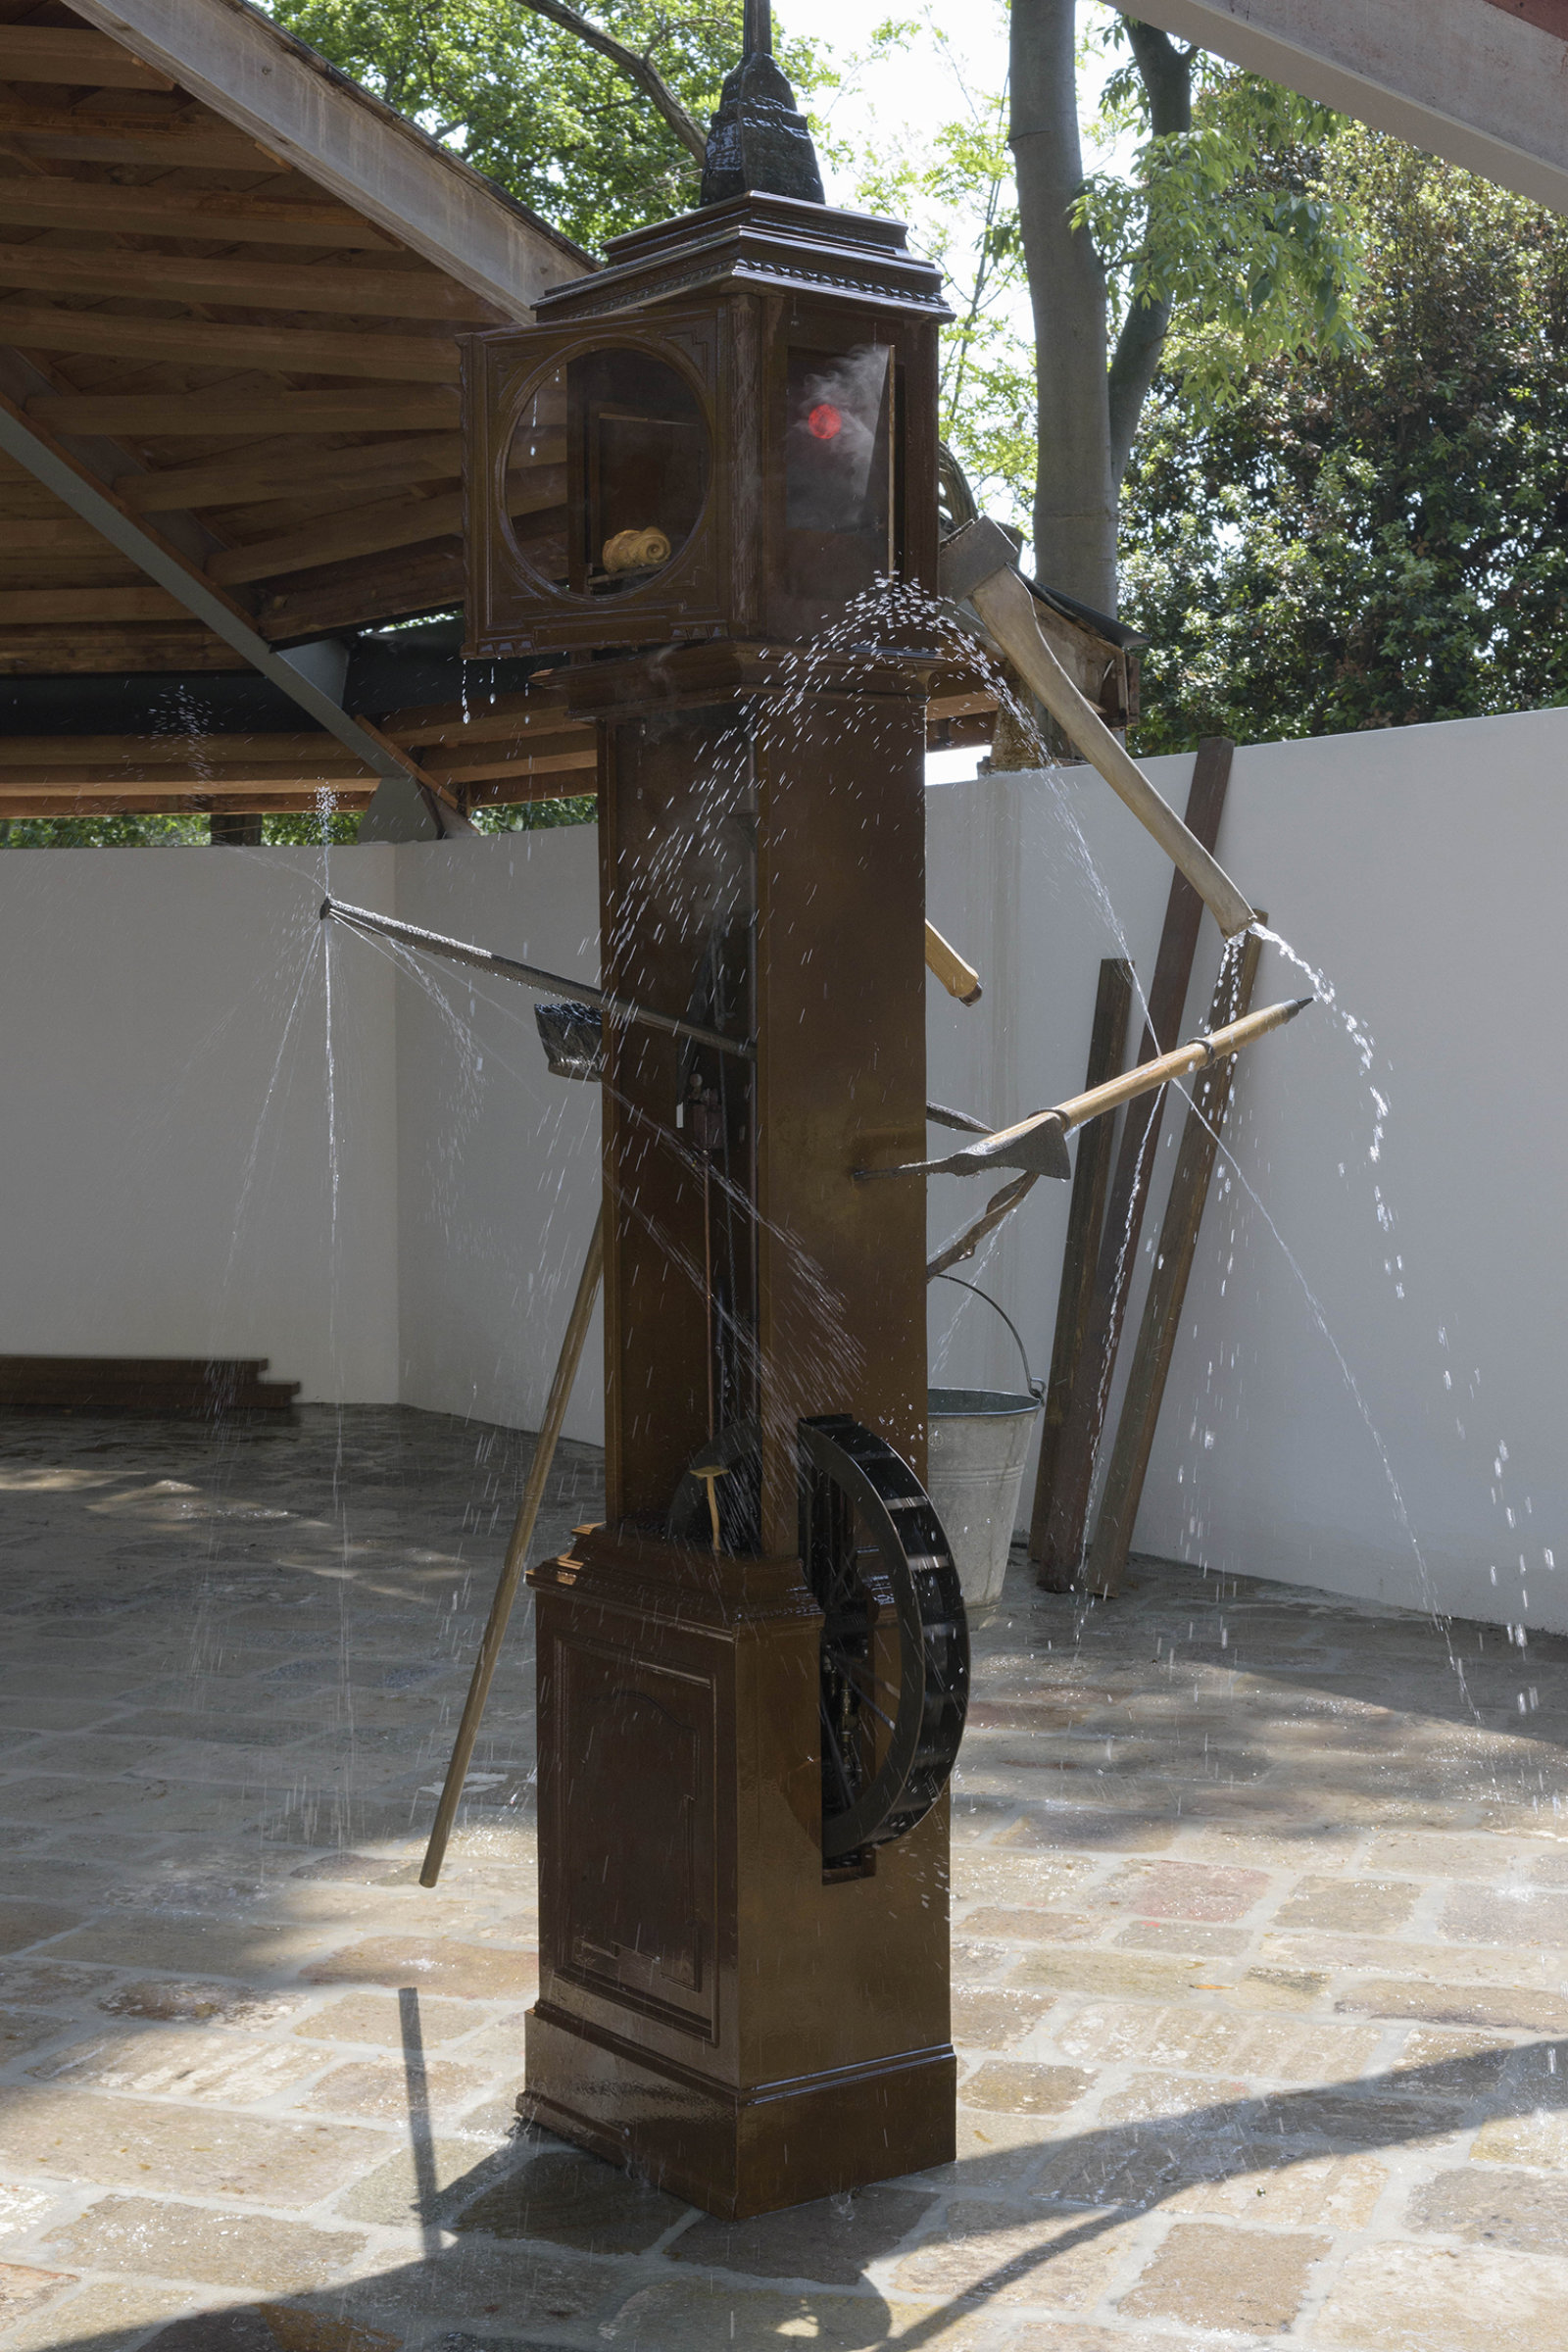 Geoffrey Farmer, Wounded Man, 2017, assembled cast bronze objects, waterworks, 118 x 20 x 20 in. (300 x 50 x 50 cm). Installation view, A way out of the mirror, Canada Pavilion, 57th Venice Biennale, Venice, Italy